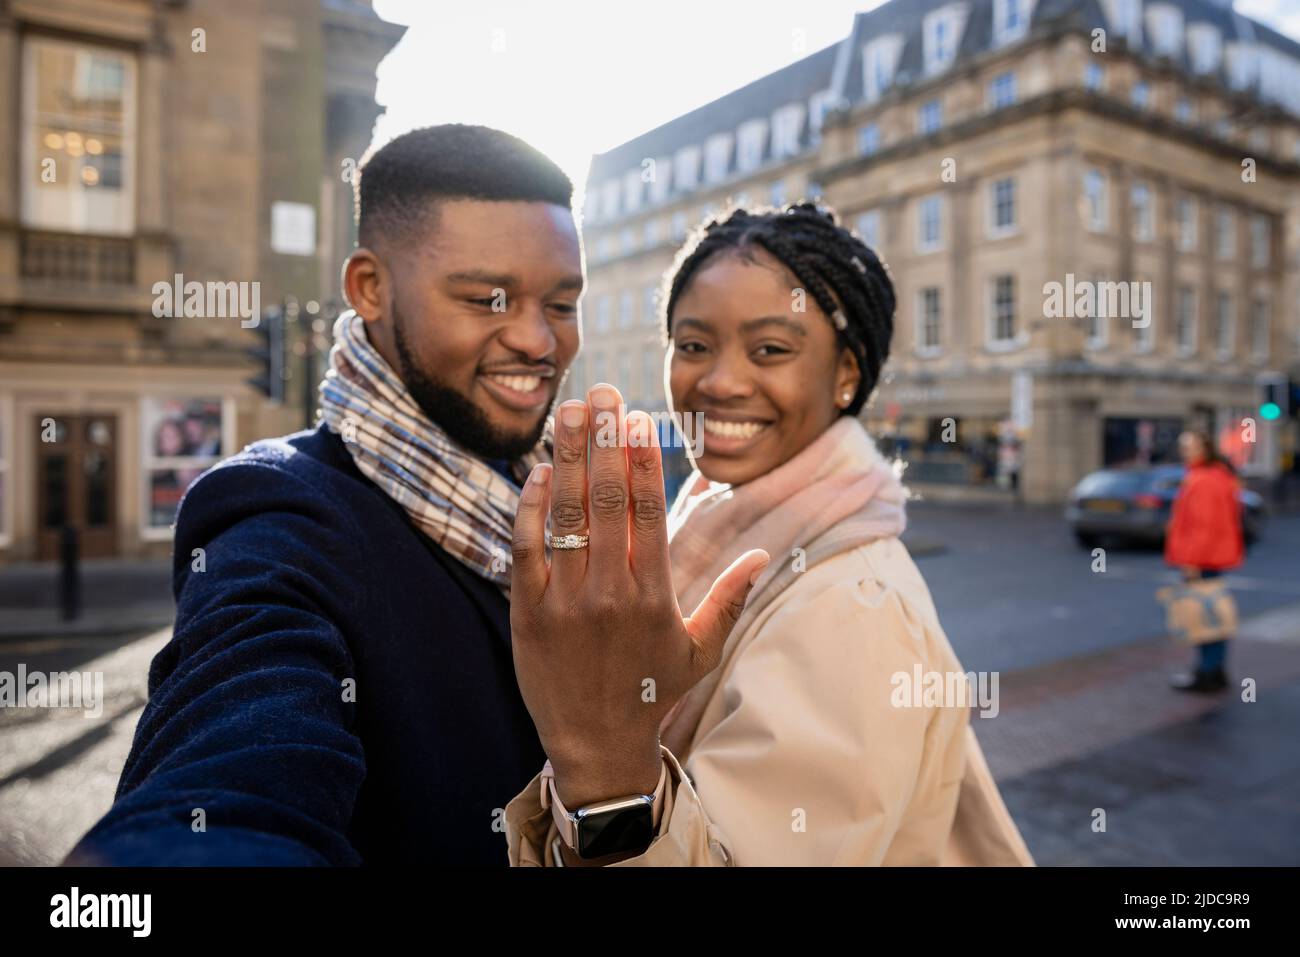 Cheerful couple in town, woman holging hand up to show engagement ring Stock Photo